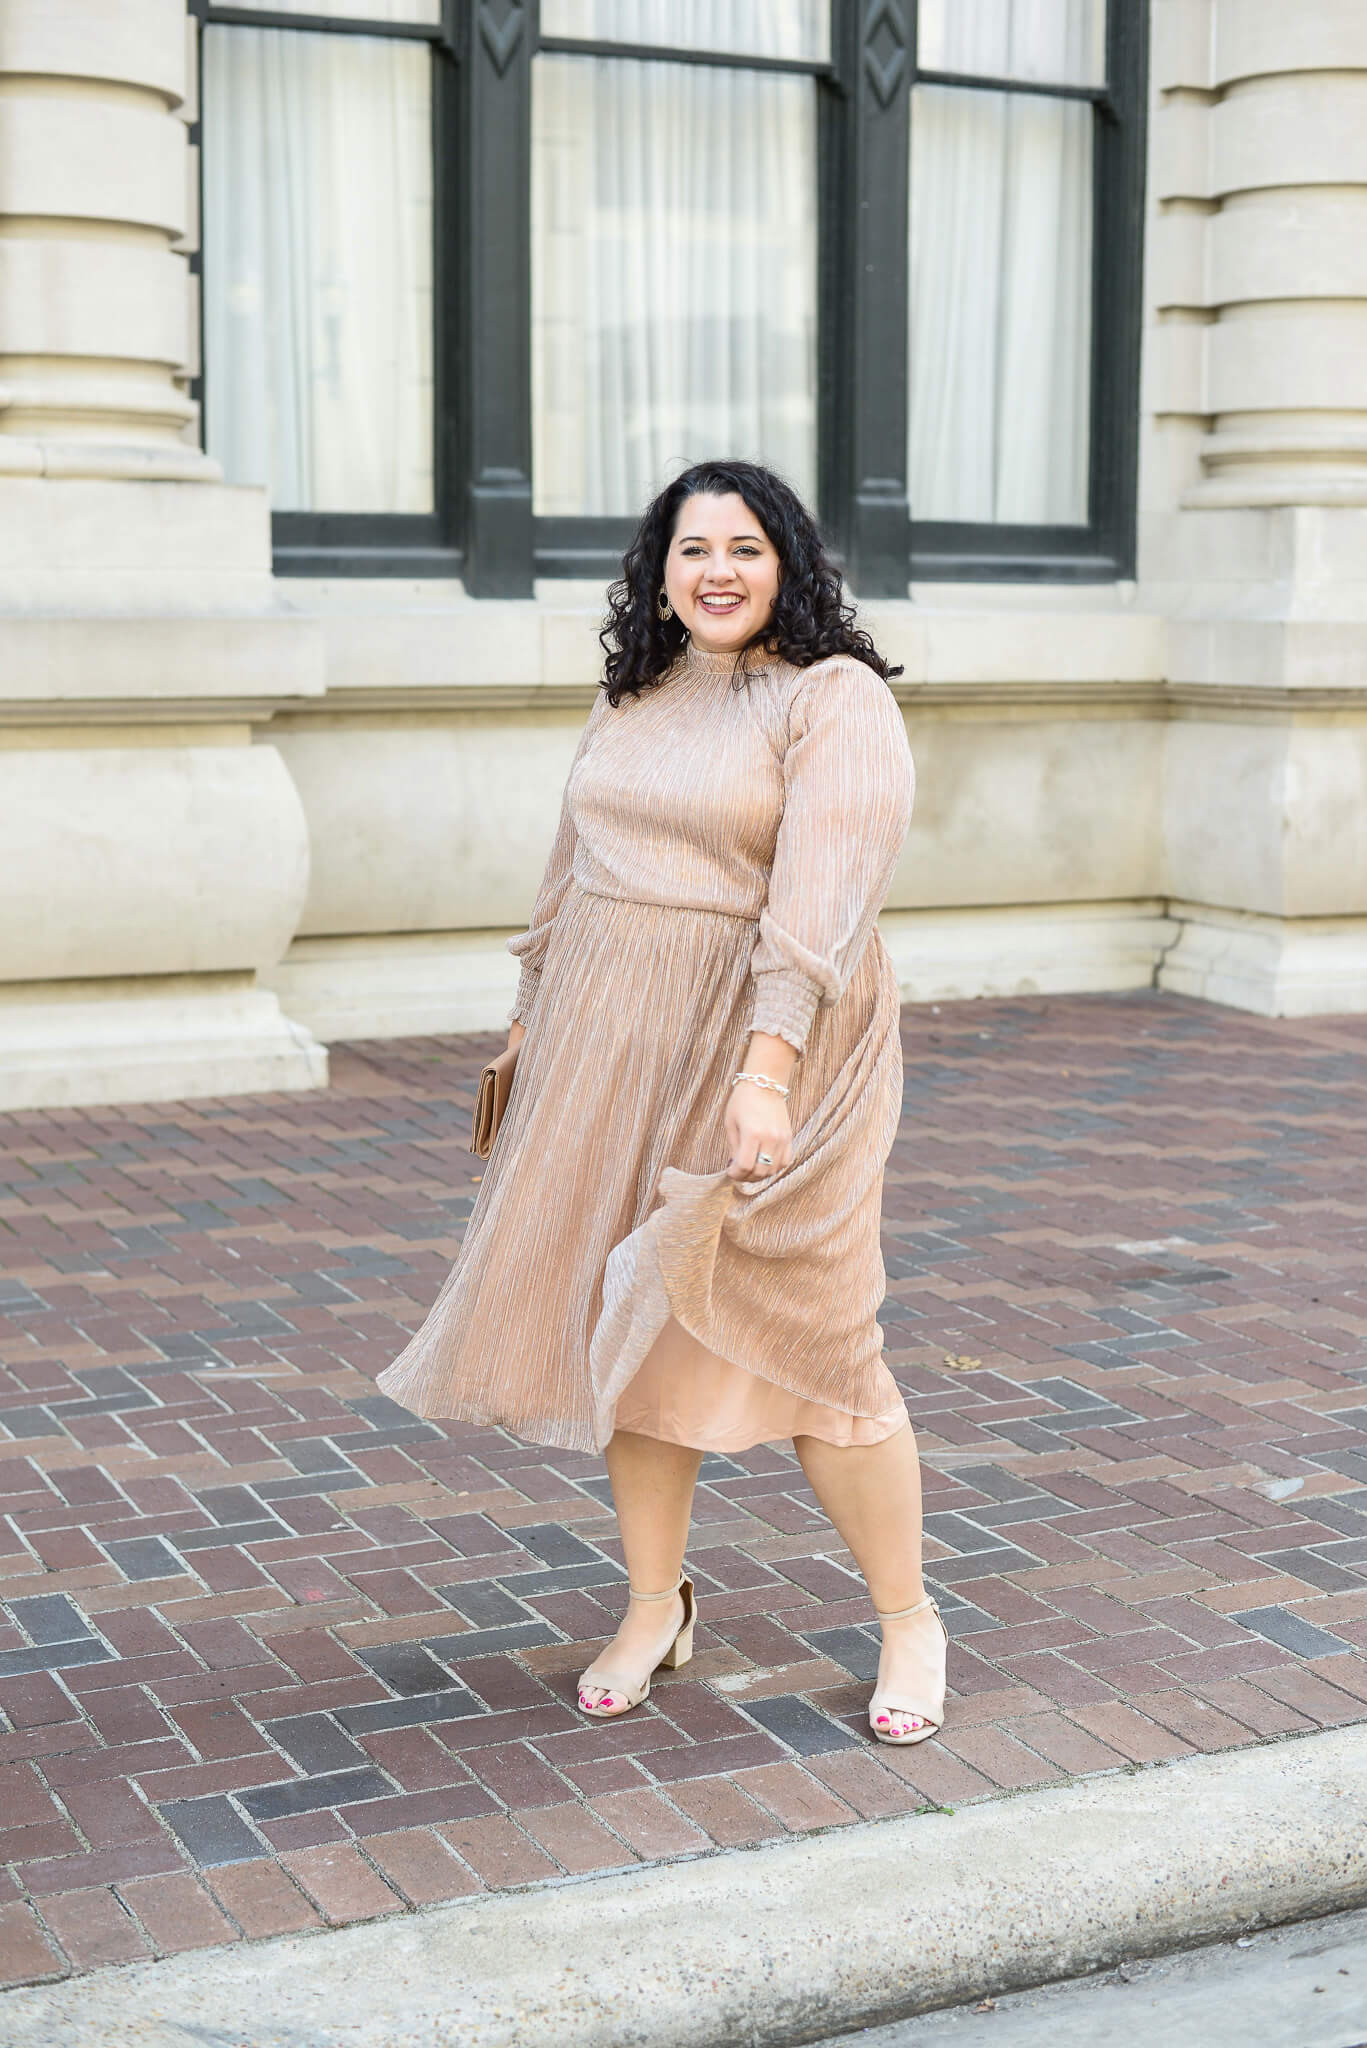 Looking for plus size NYE party outfits? I've rounded up 3 of my favorite for this season